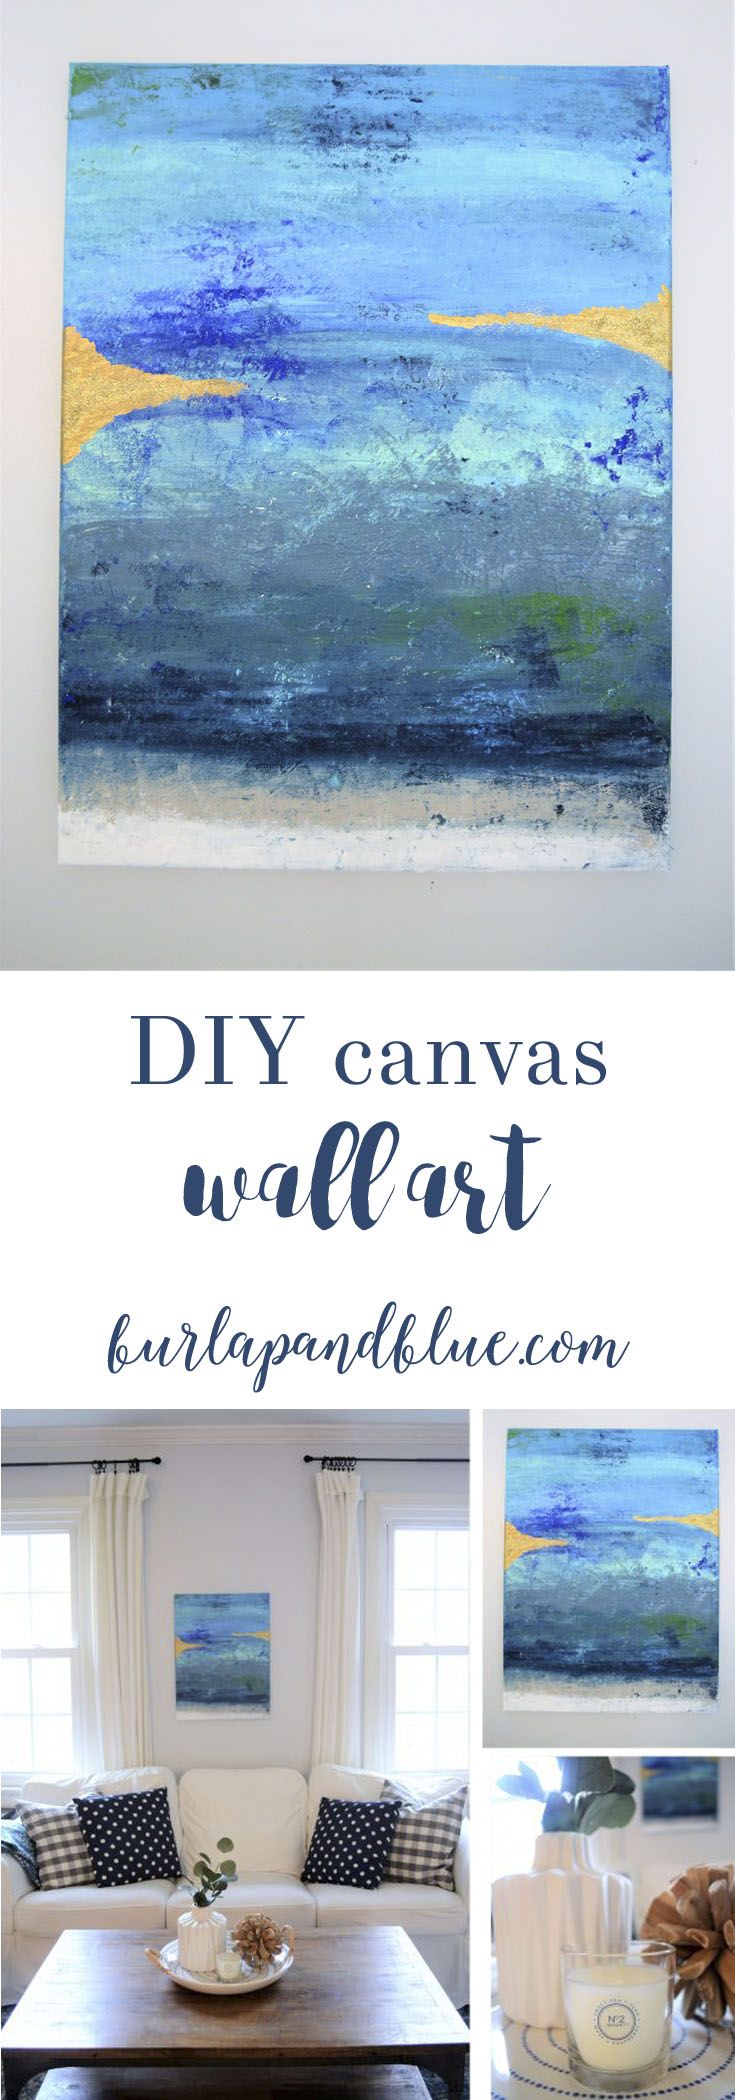 Canvas Painting Tutorial {How to Paint a Canvas}